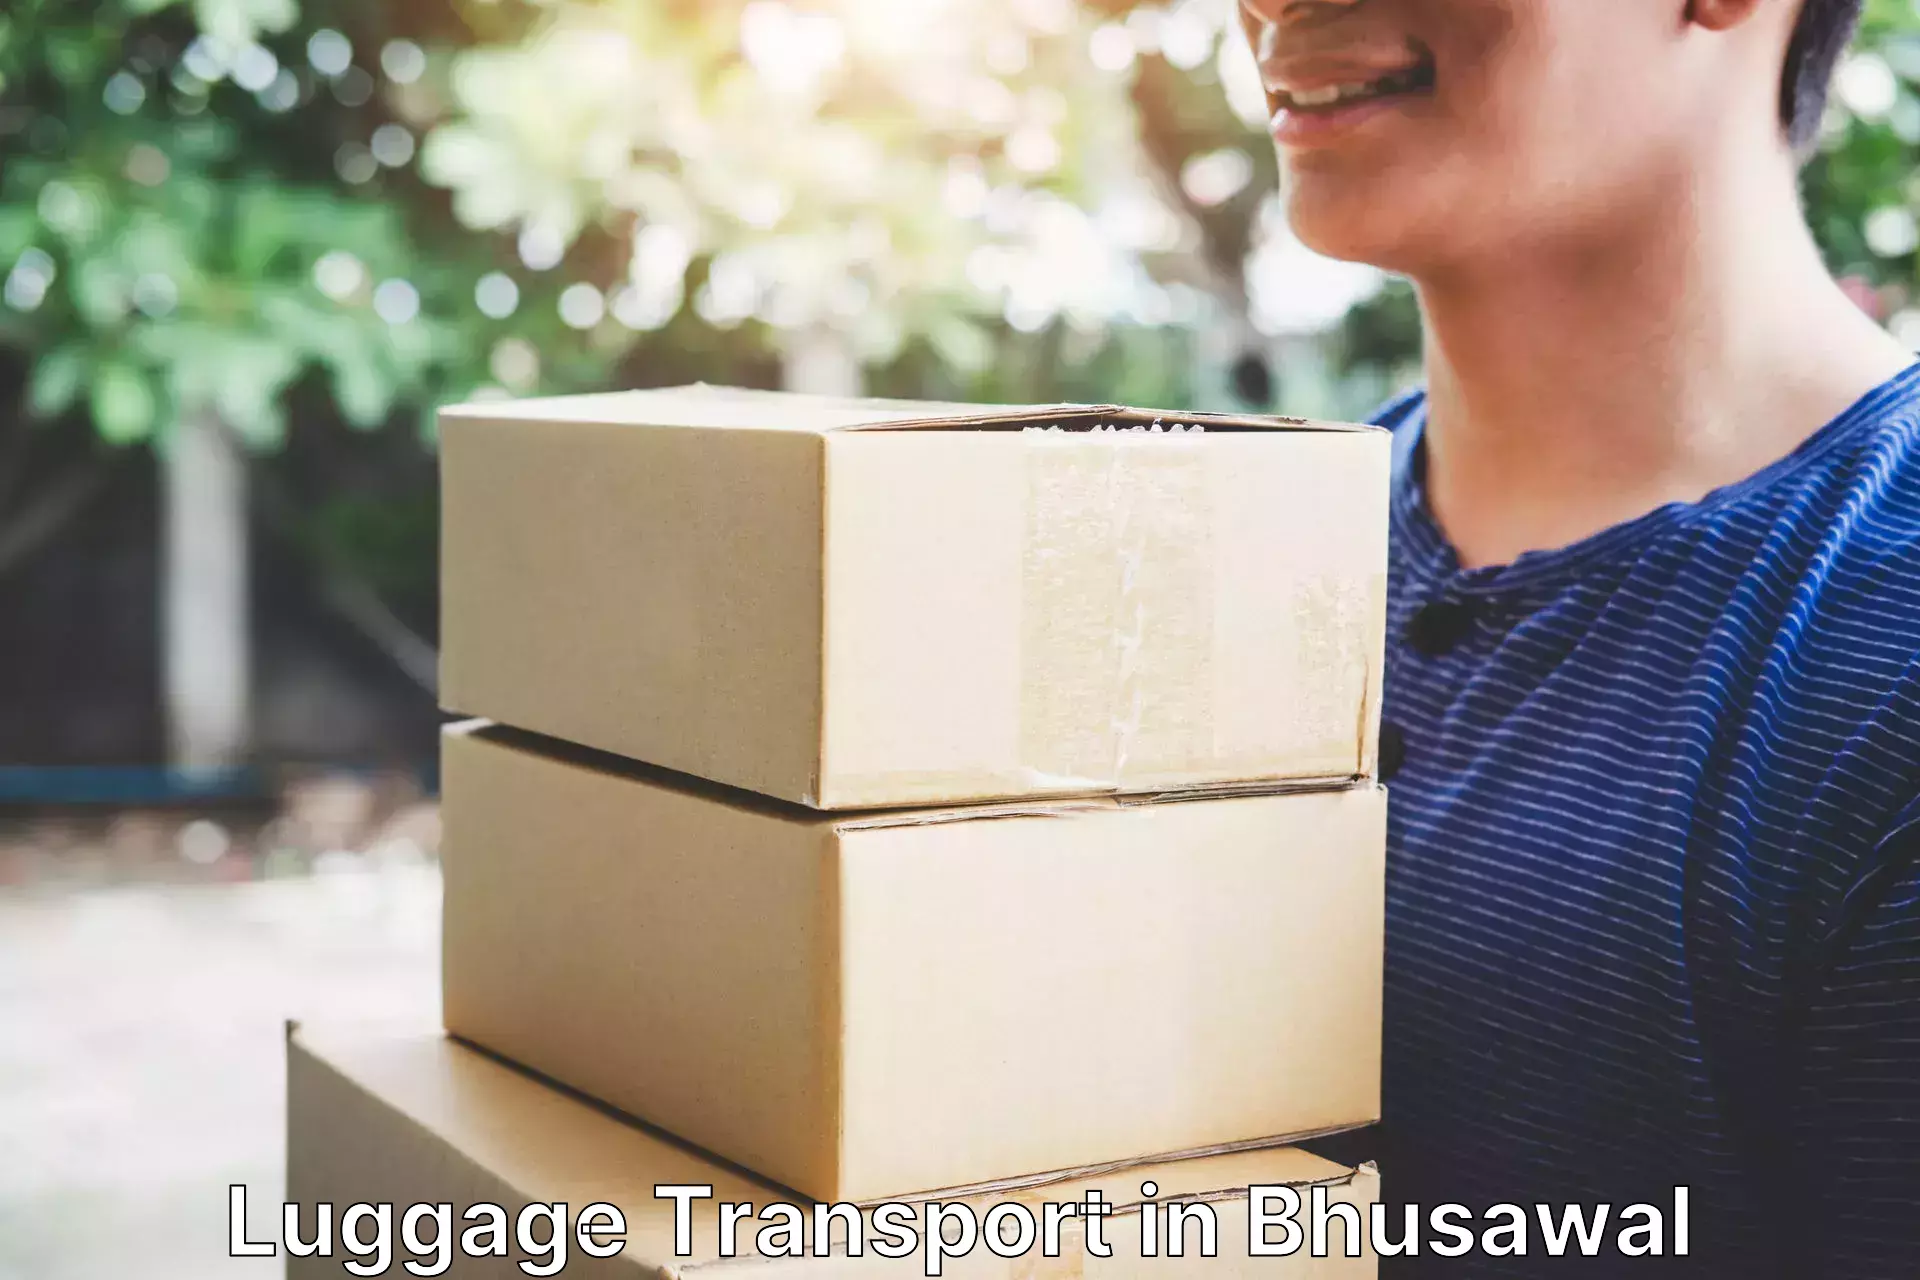 Baggage shipping experience in Bhusawal